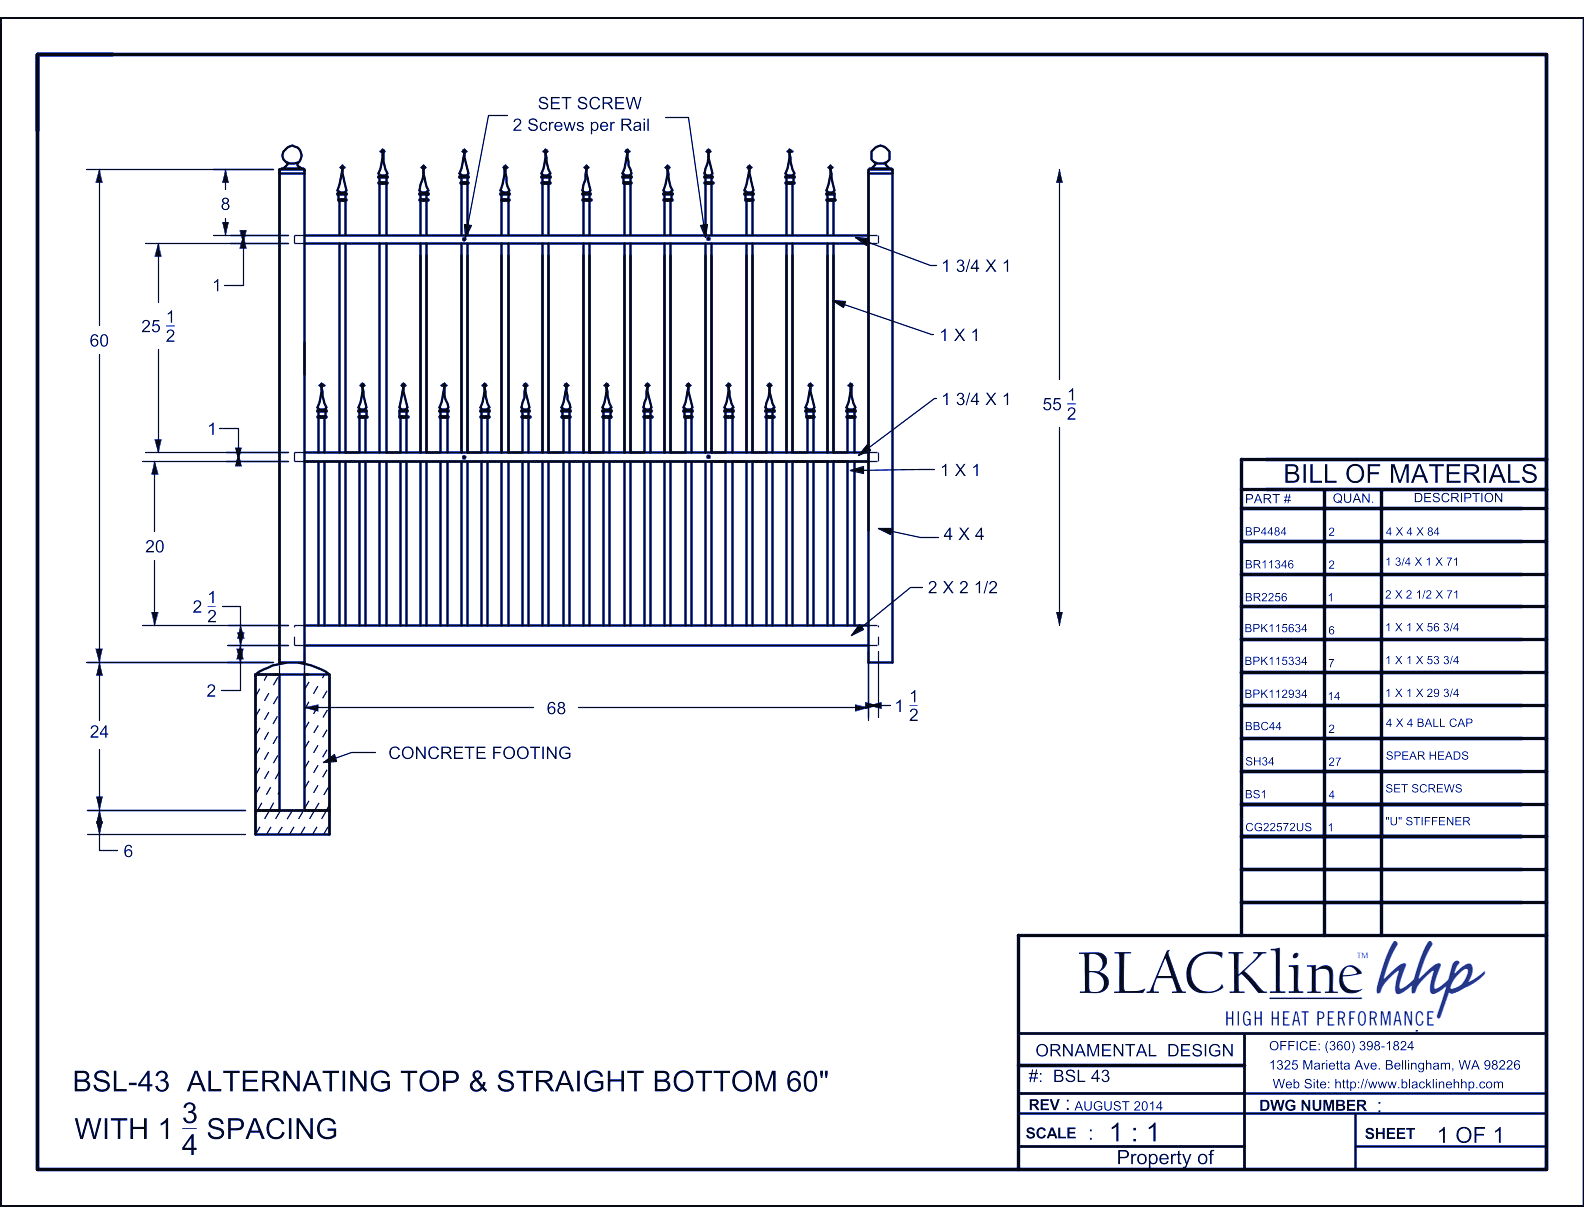 BSL-43: Alternating Top & Straight Bottom 60" with 1 3/4” Spacing